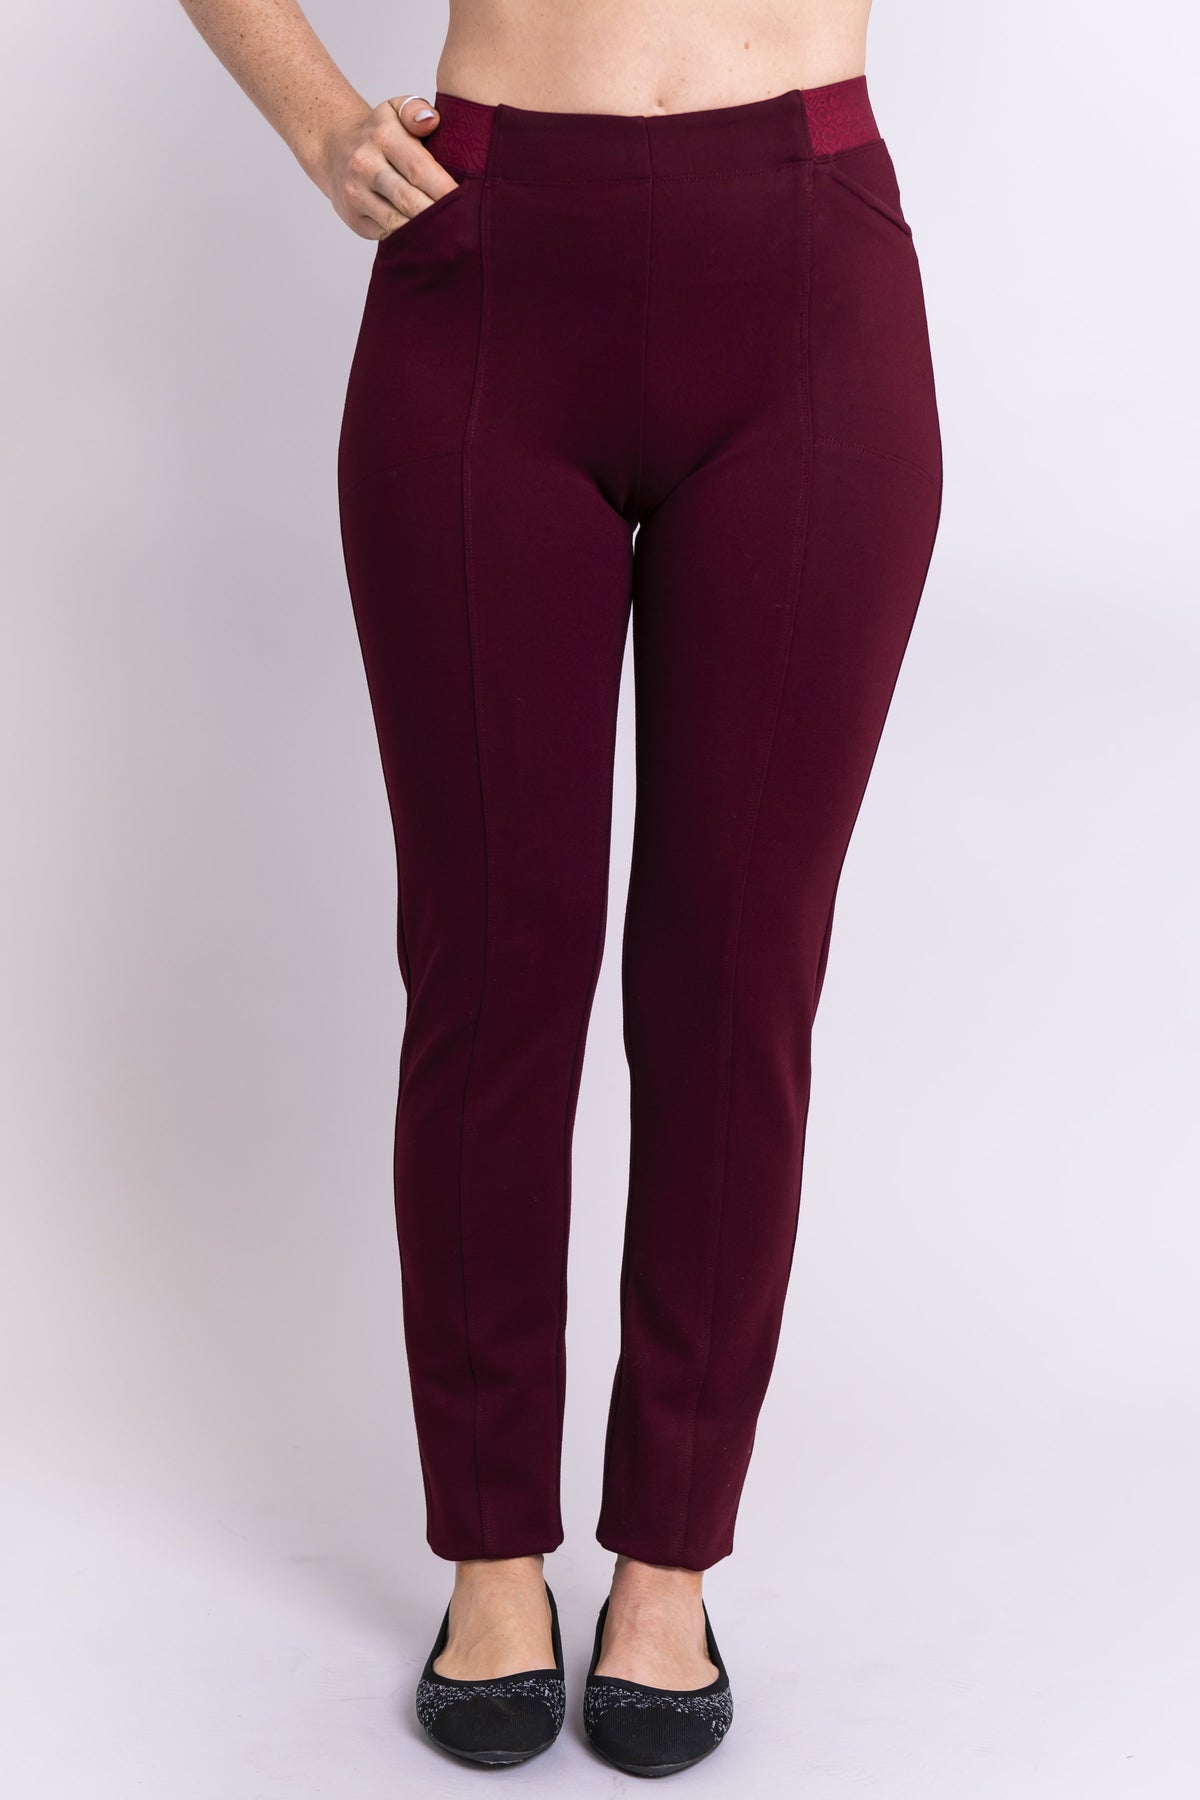 Front view of women's petite burgundy tailored pant, with slim and narrow leg. Made of sustainable and natural bamboo fibers, fair-trade.